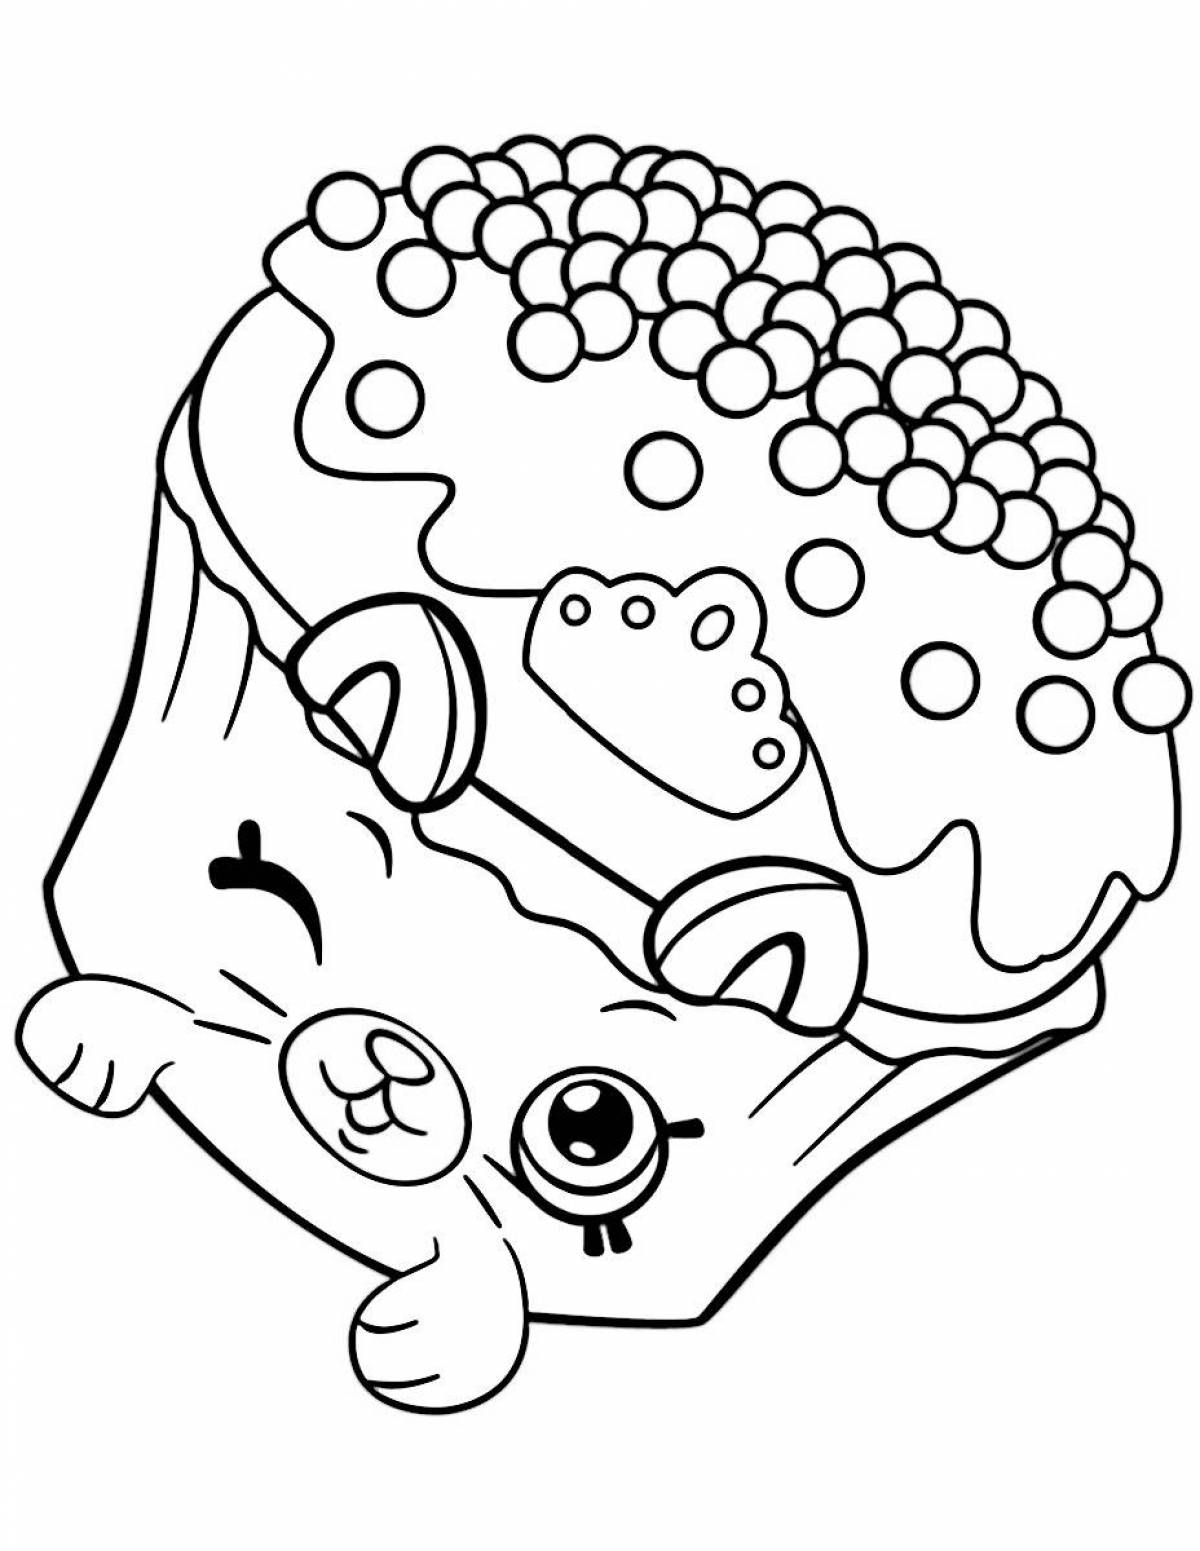 Shopkins amazing coloring page